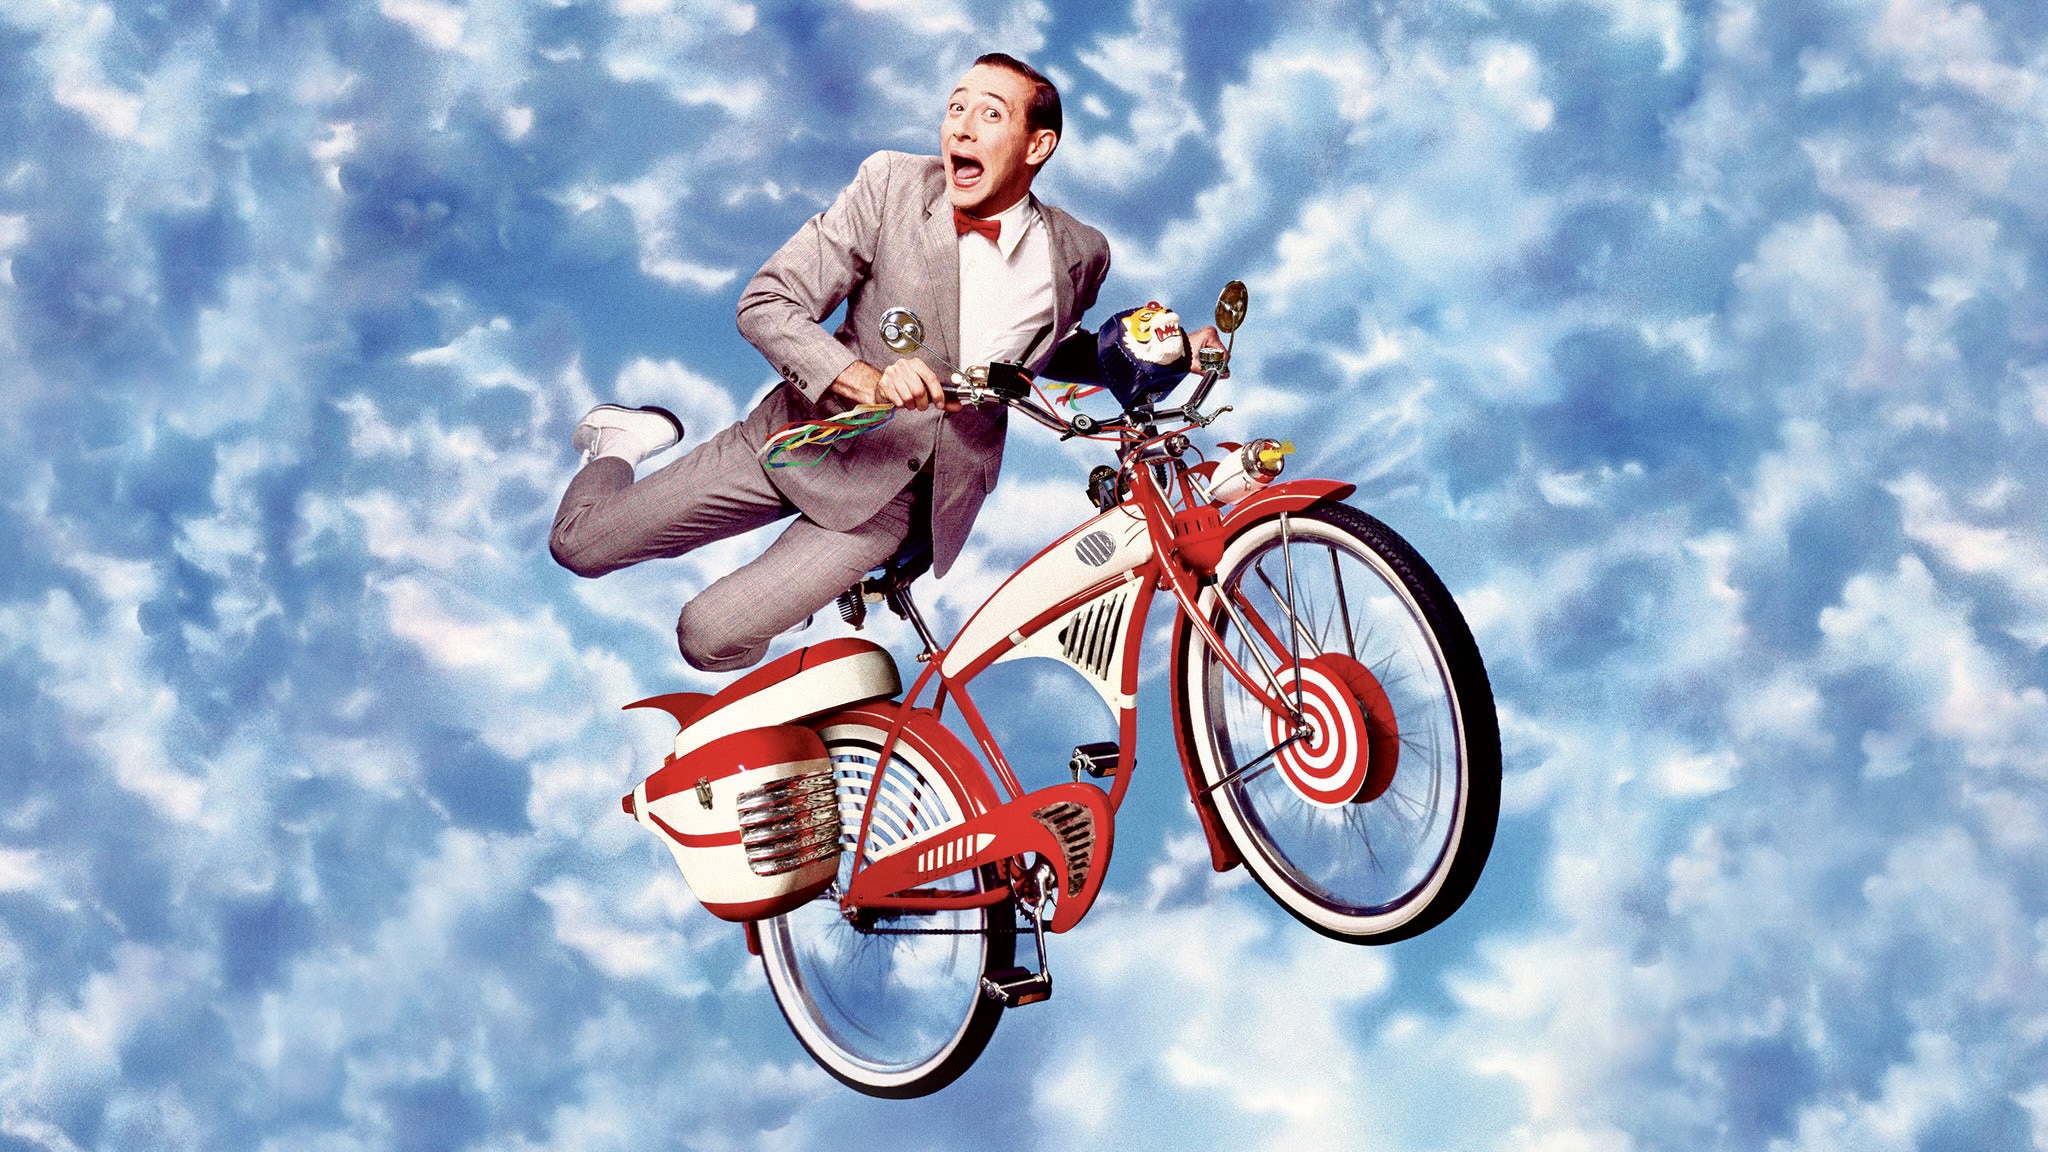 Pee-wee’s Big Adventure surges in popularity on streaming following death of Paul Reubens